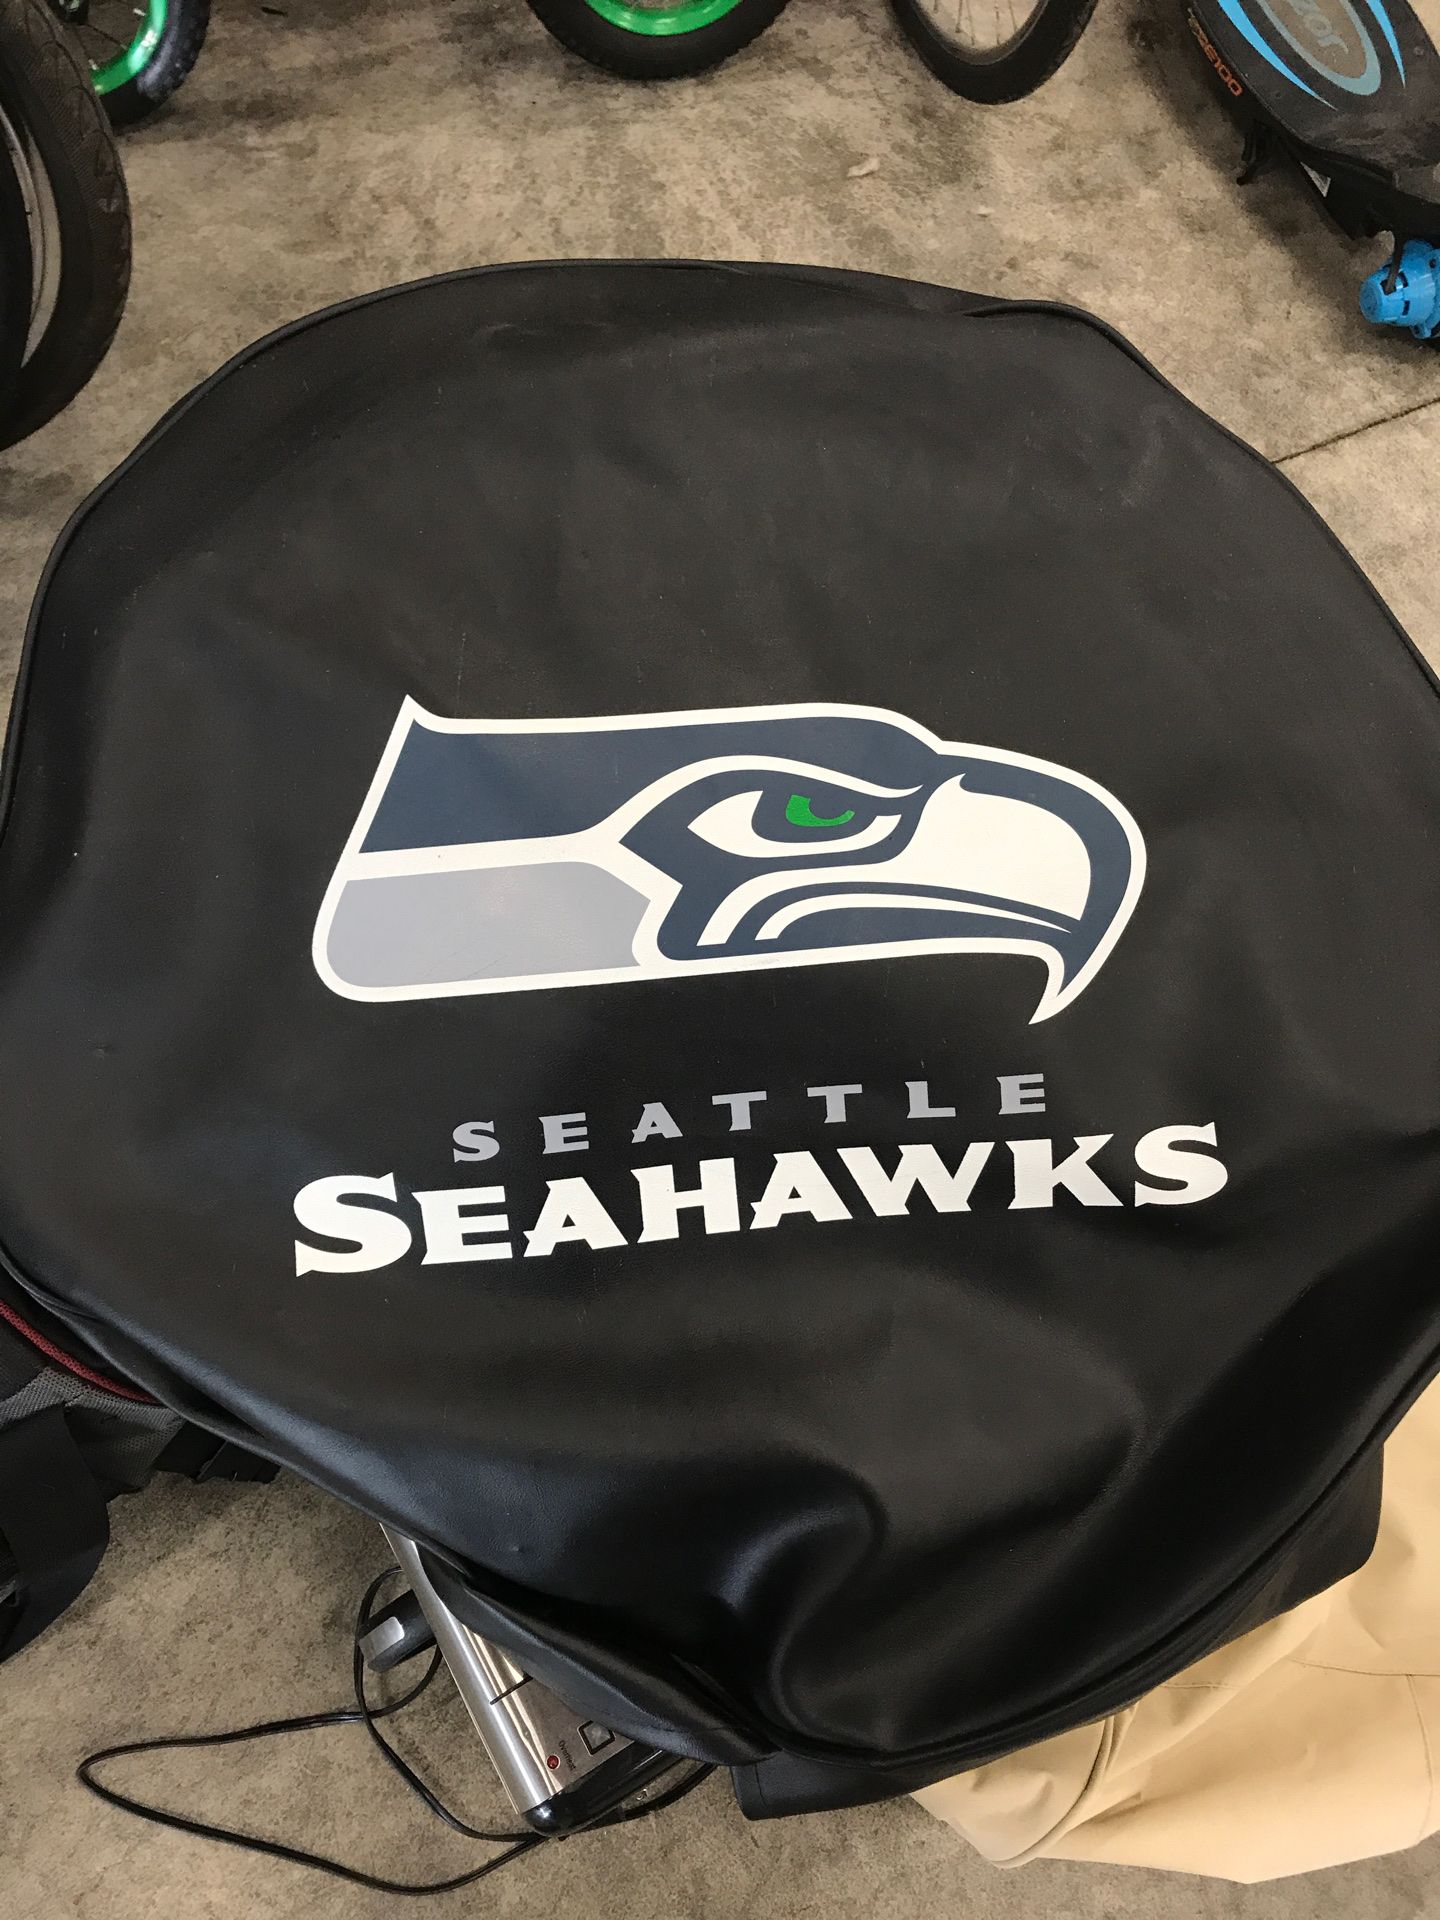 SEAHAWKS spare tire cover LIKE NEW